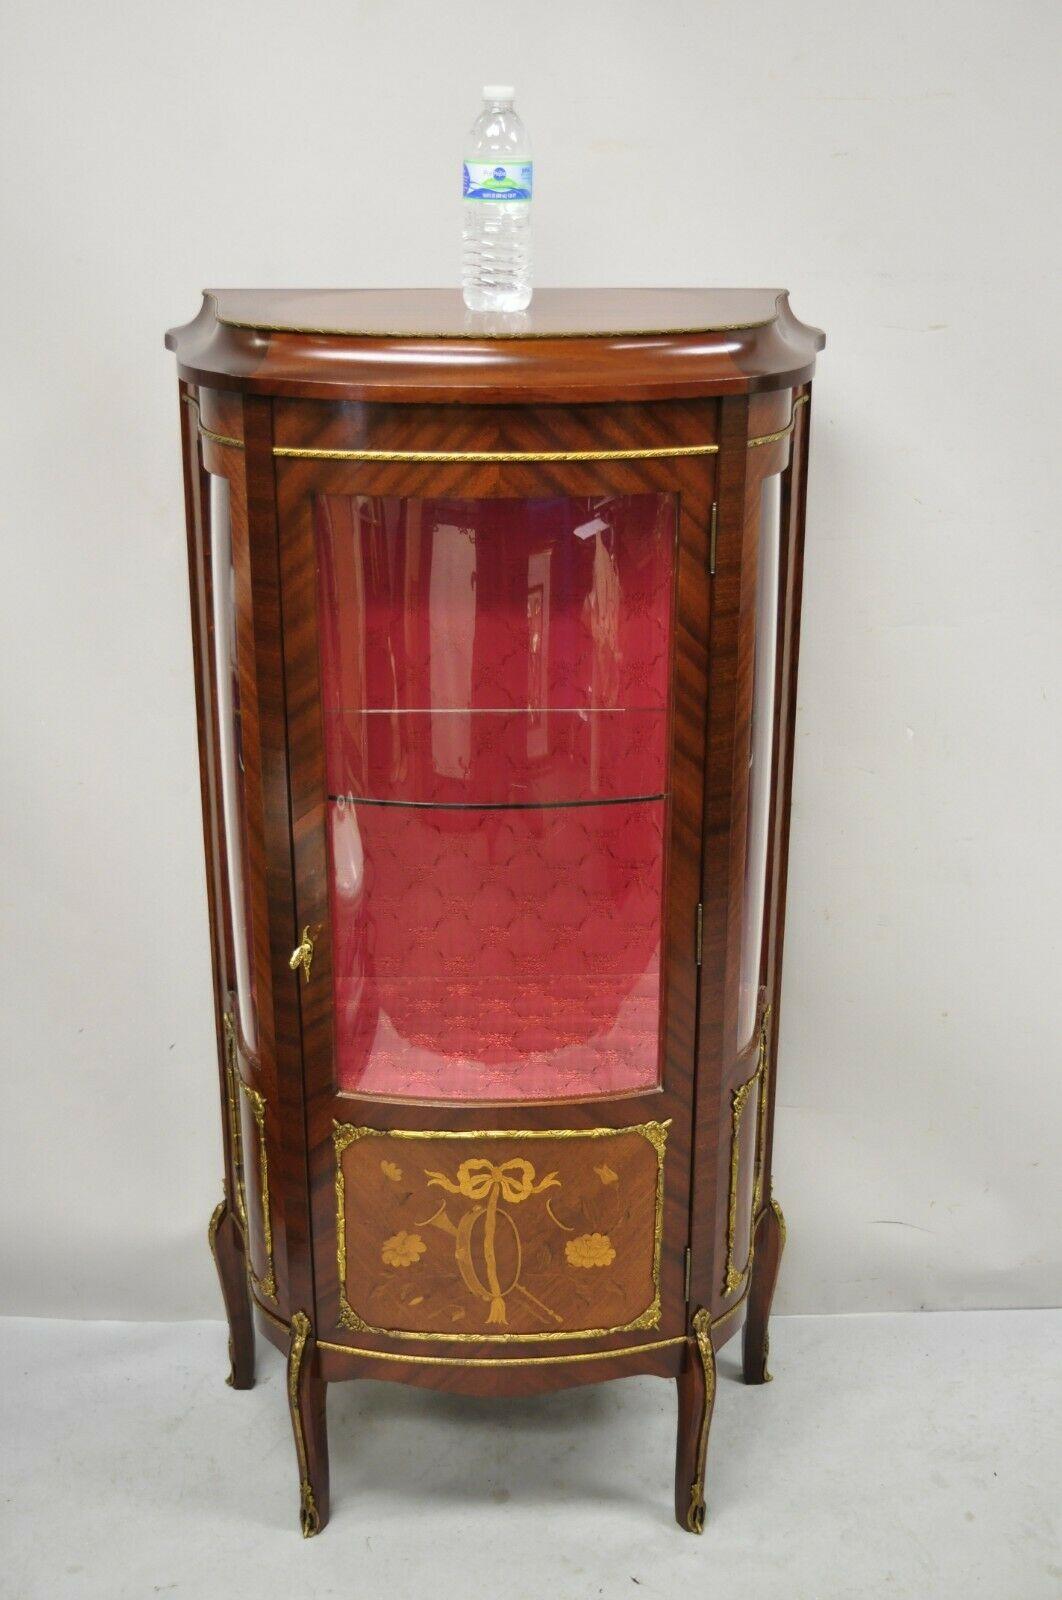 French Louis XV Style Small Curio Display Cabinet Bowed Glass and Inlay. Item features a curved bowed glass door and side panels, floral satinwood inlay, upholstered interior, bronze ormolu, beautiful wood grain,1 glass shelf, cabriole legs, quality